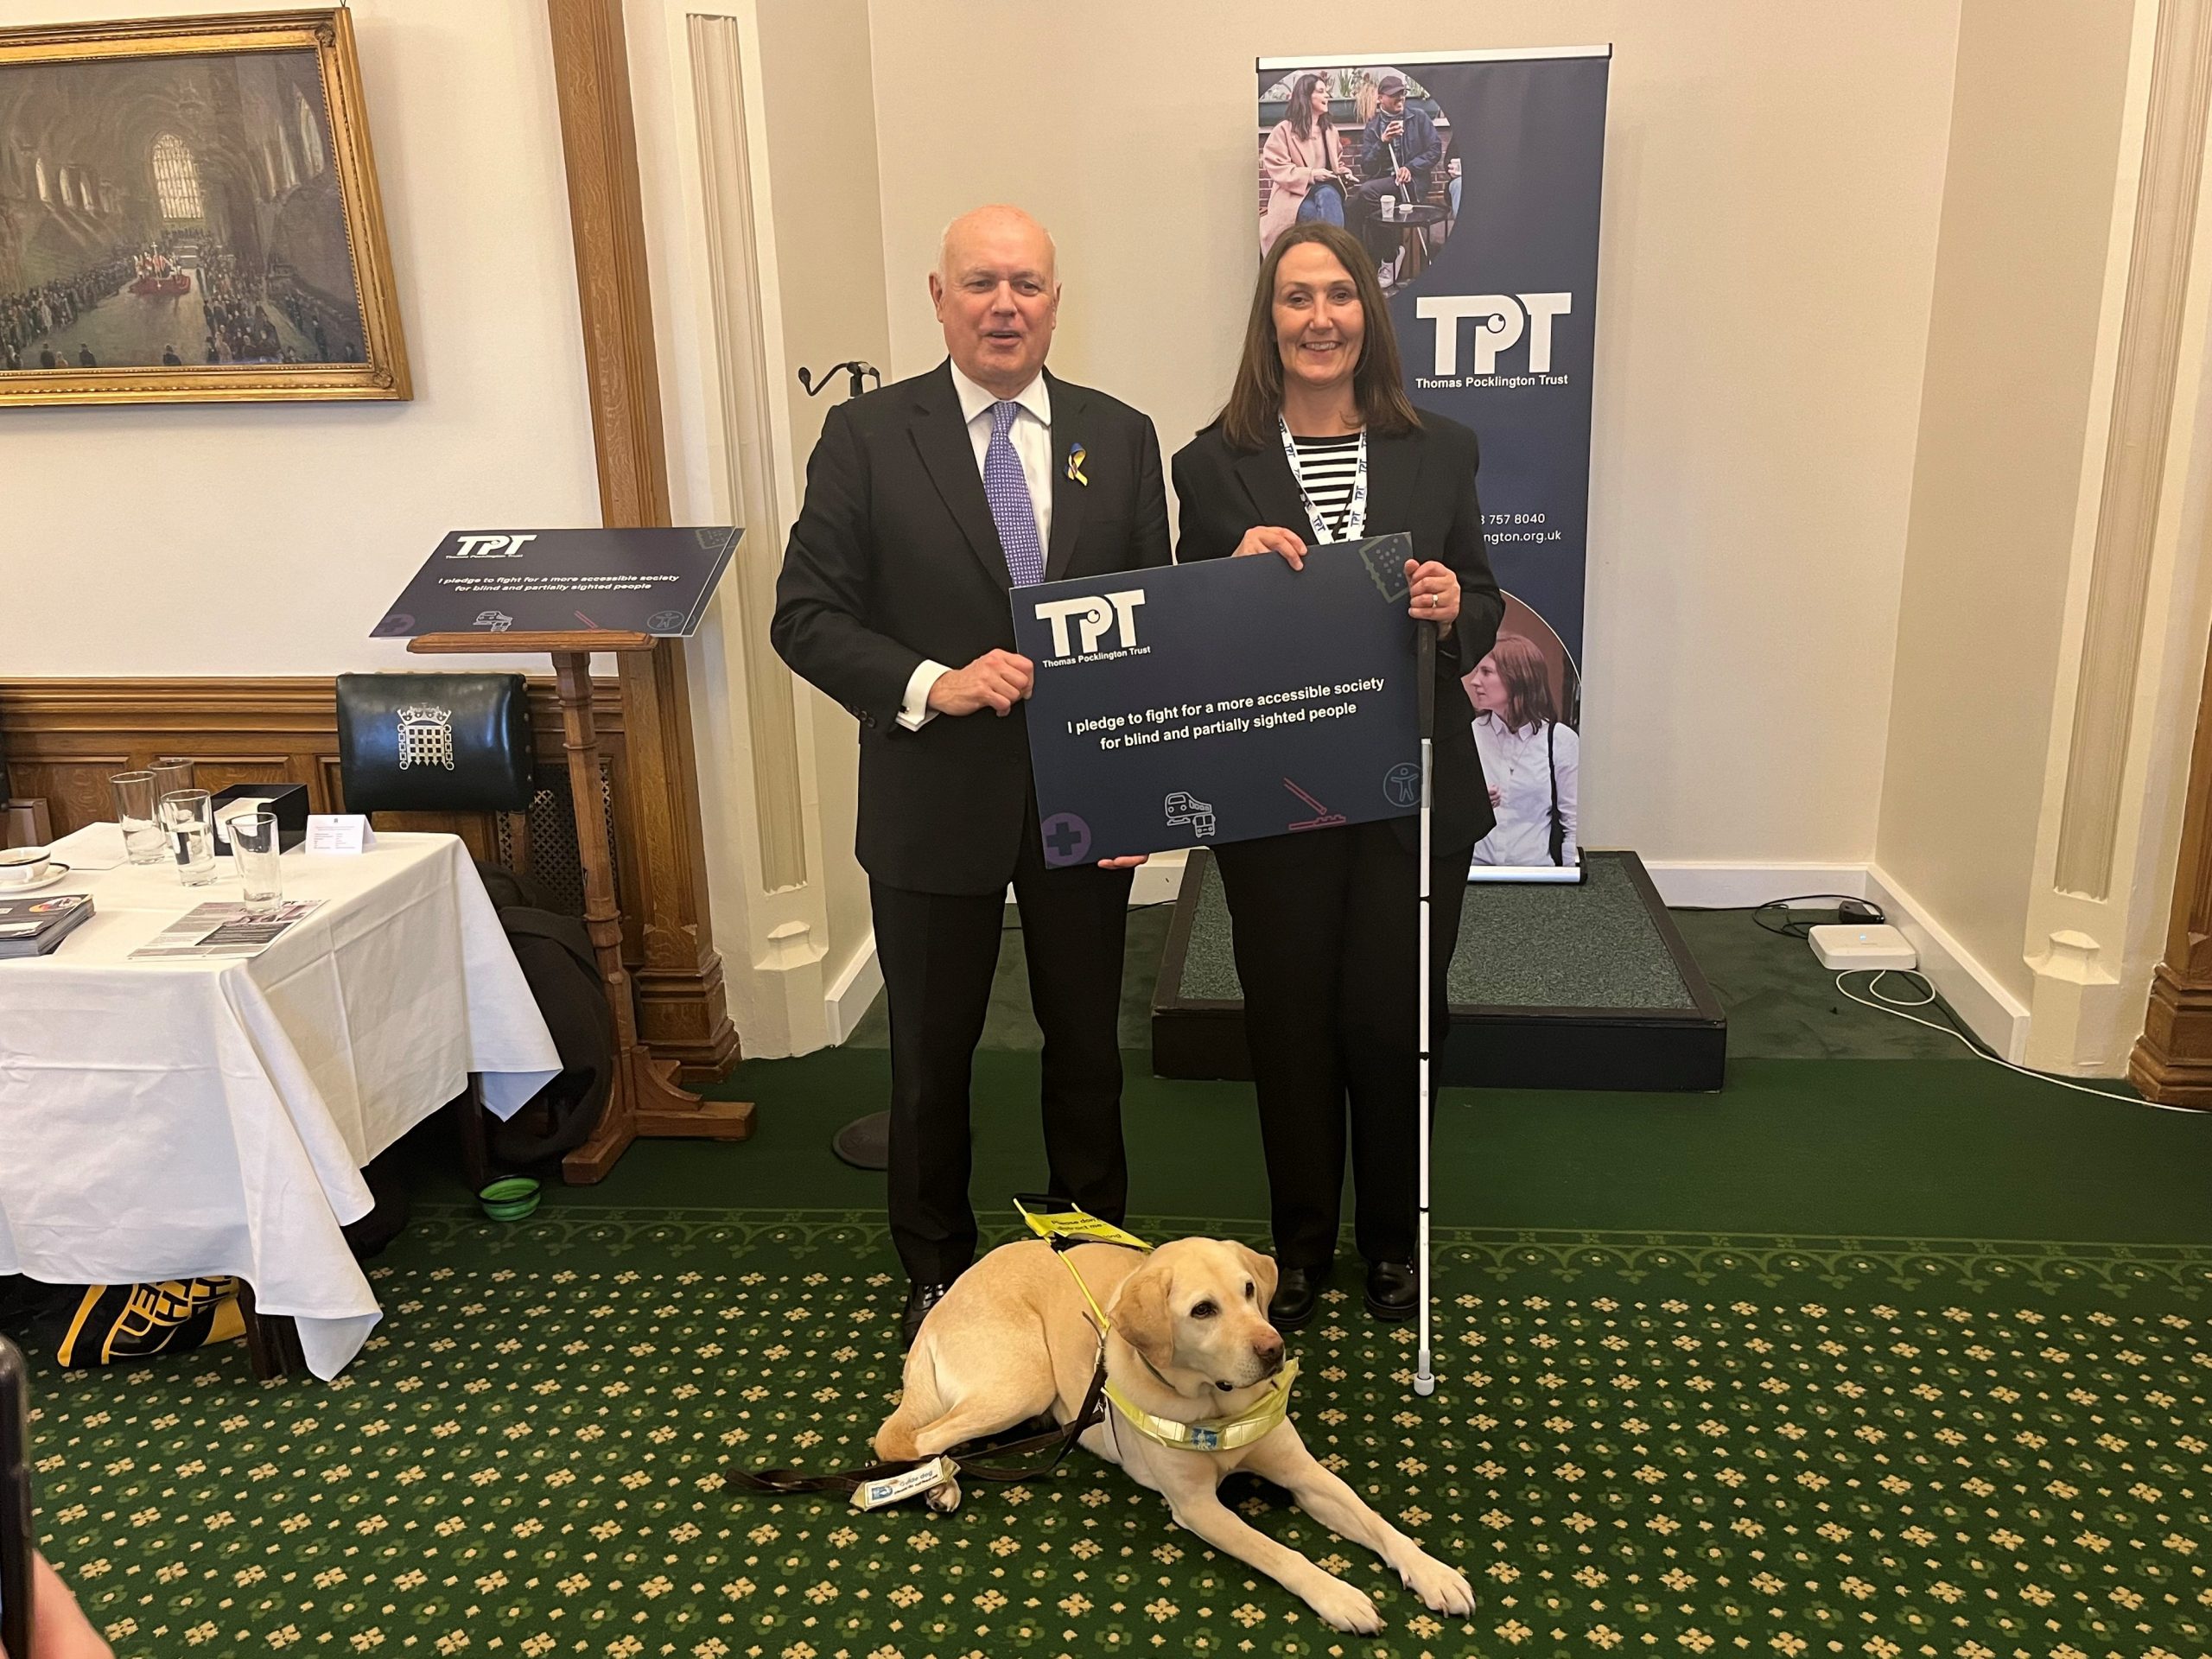 Iain Duncan Smith, Conservative MP for Chingford and Woodford Green, pictured with Cathy Low, Director of Partnerships at TPT holding the TPT pledge. Guide dog Anna is laying on the floor in front of them.